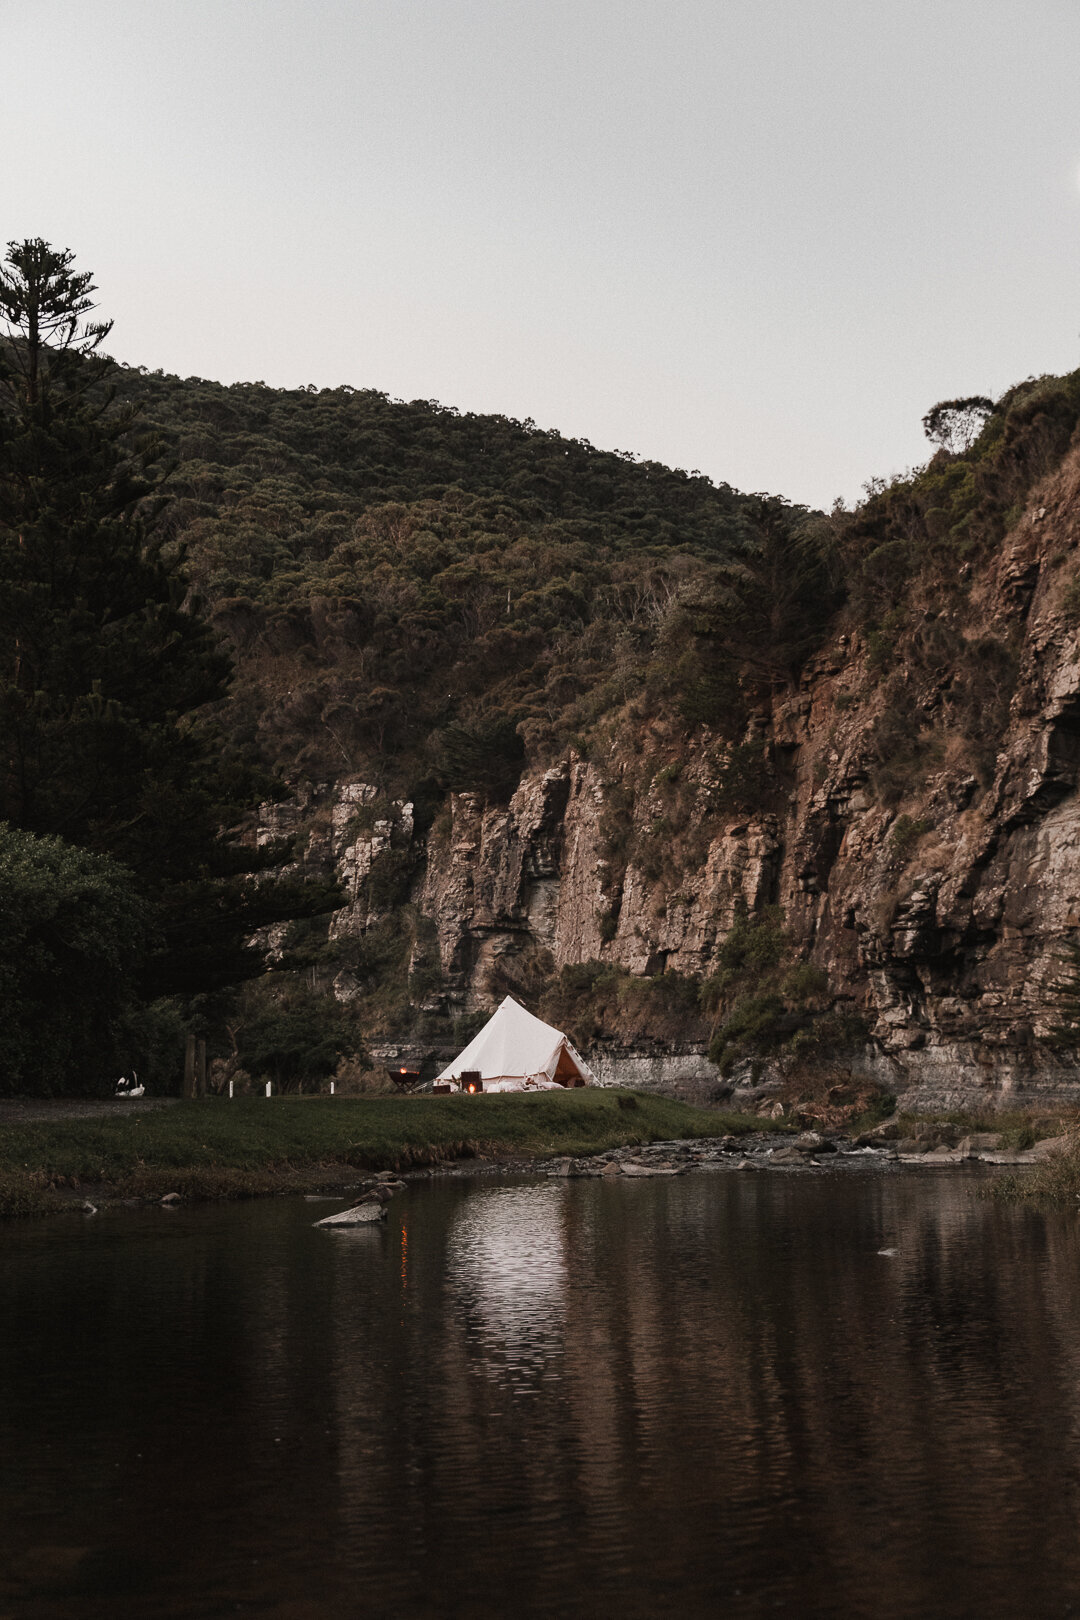 Elopement set up with campfire and glamping tent by river in the mountains